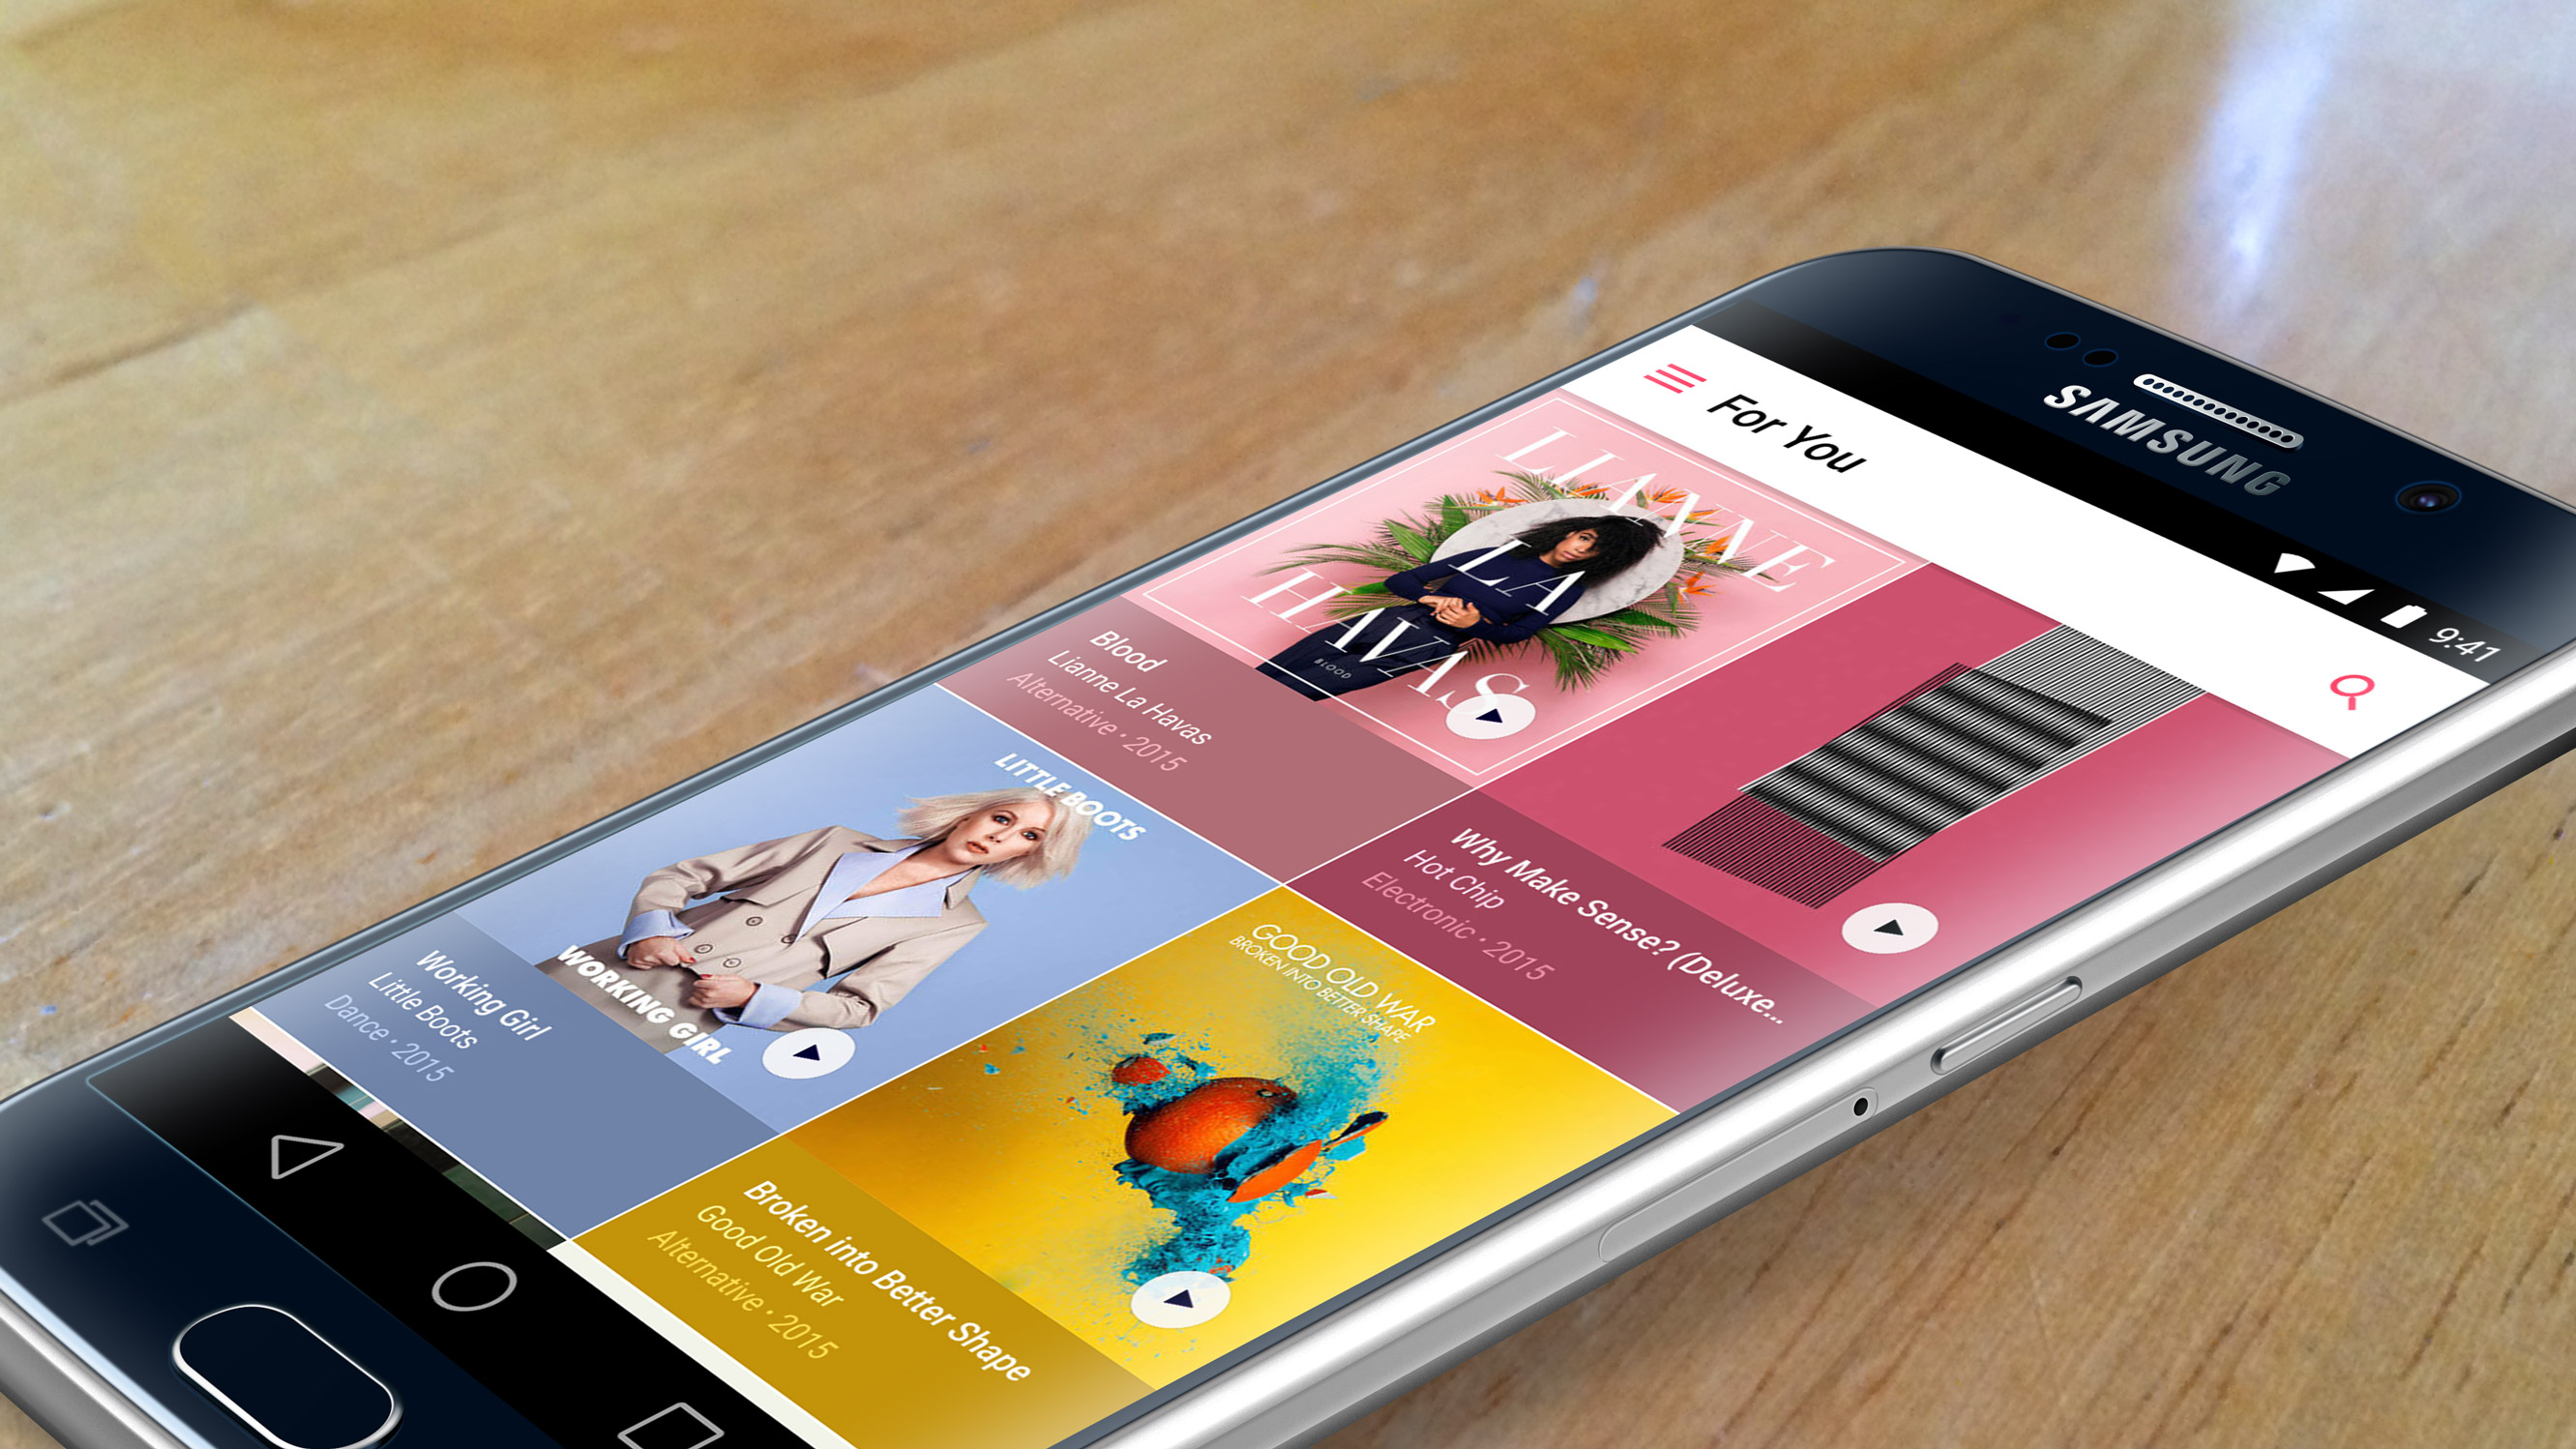 Apple Music for Android comes out of Beta with version 1.0